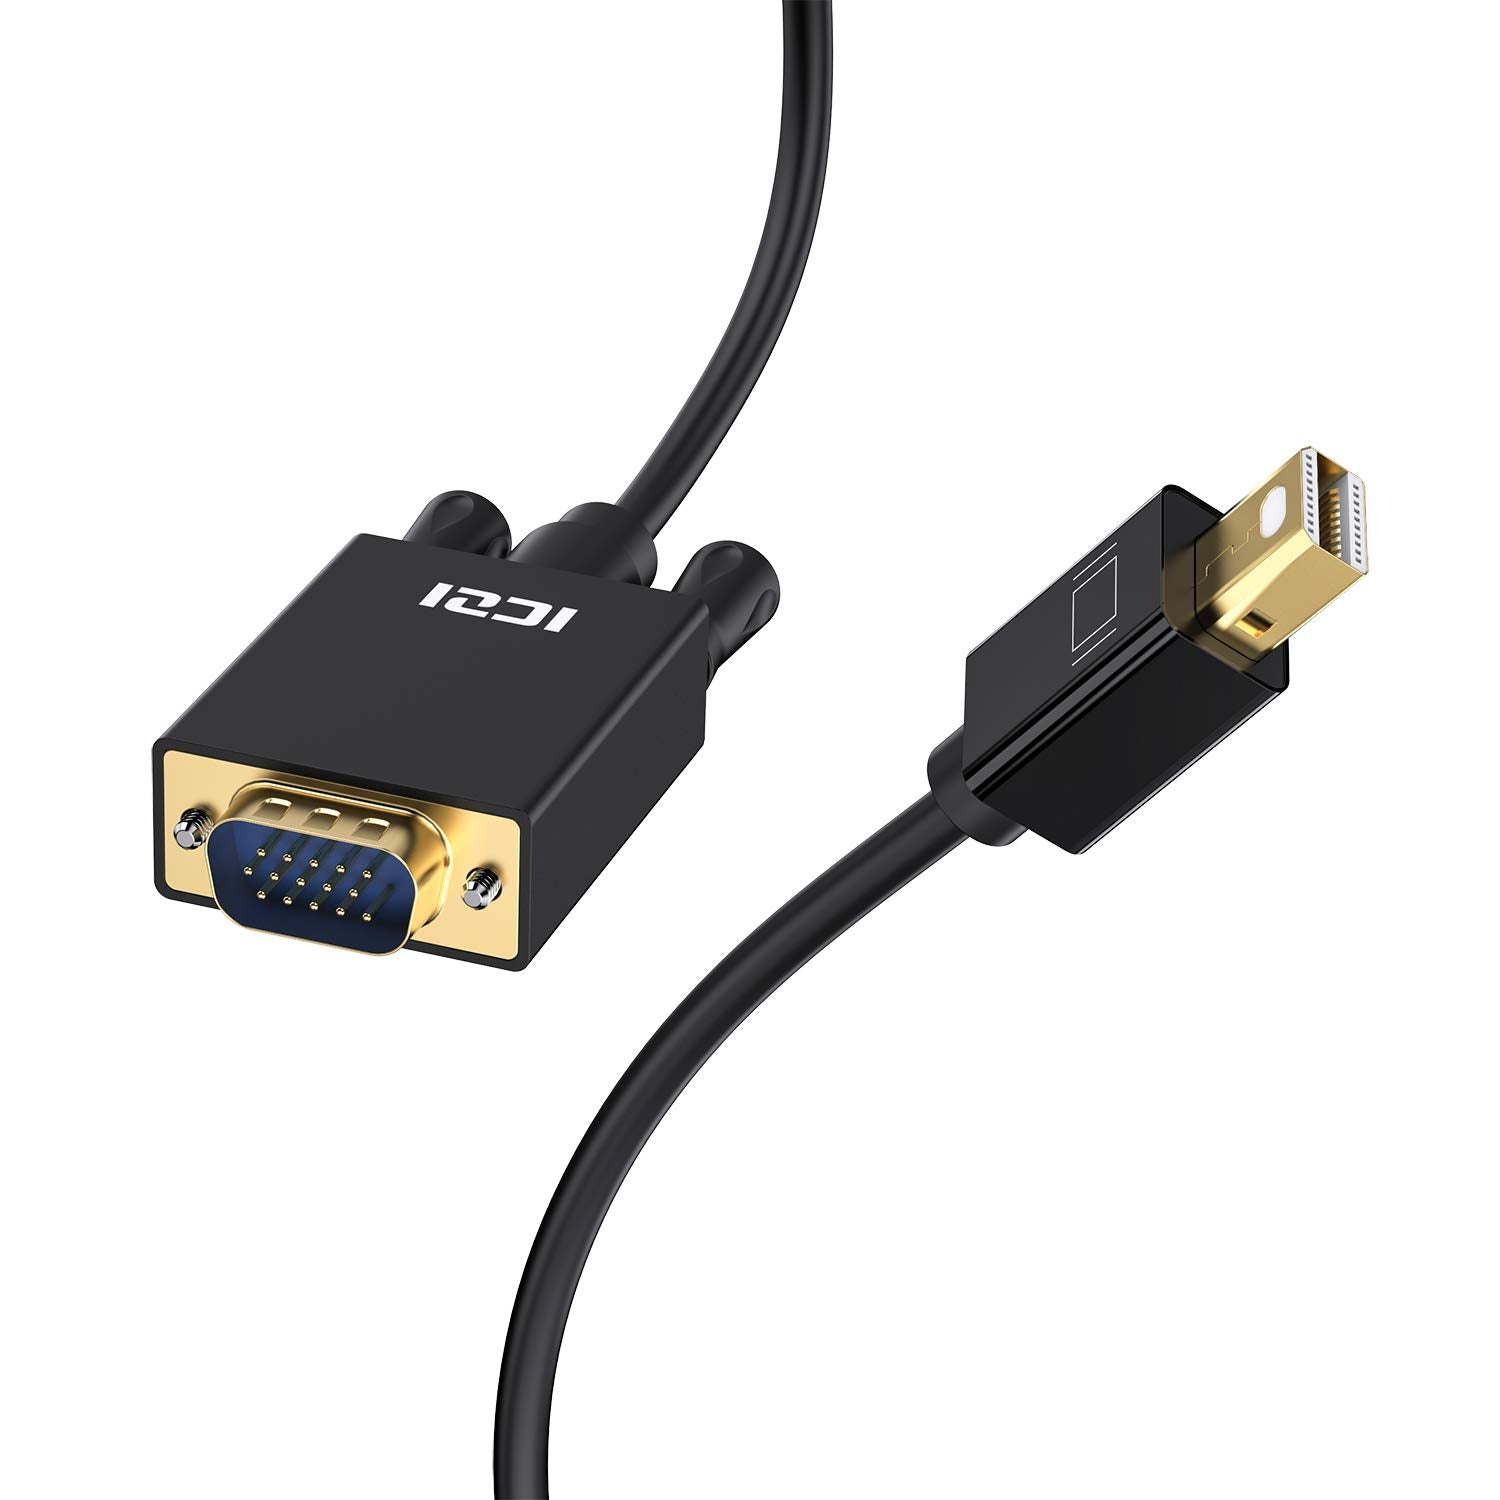 Mini DP to VGA Cable, ICZI Gold-Plated 1080P Mini DisplayPort (Thunderbolt 2 Port Compatible) to VG - e4cents